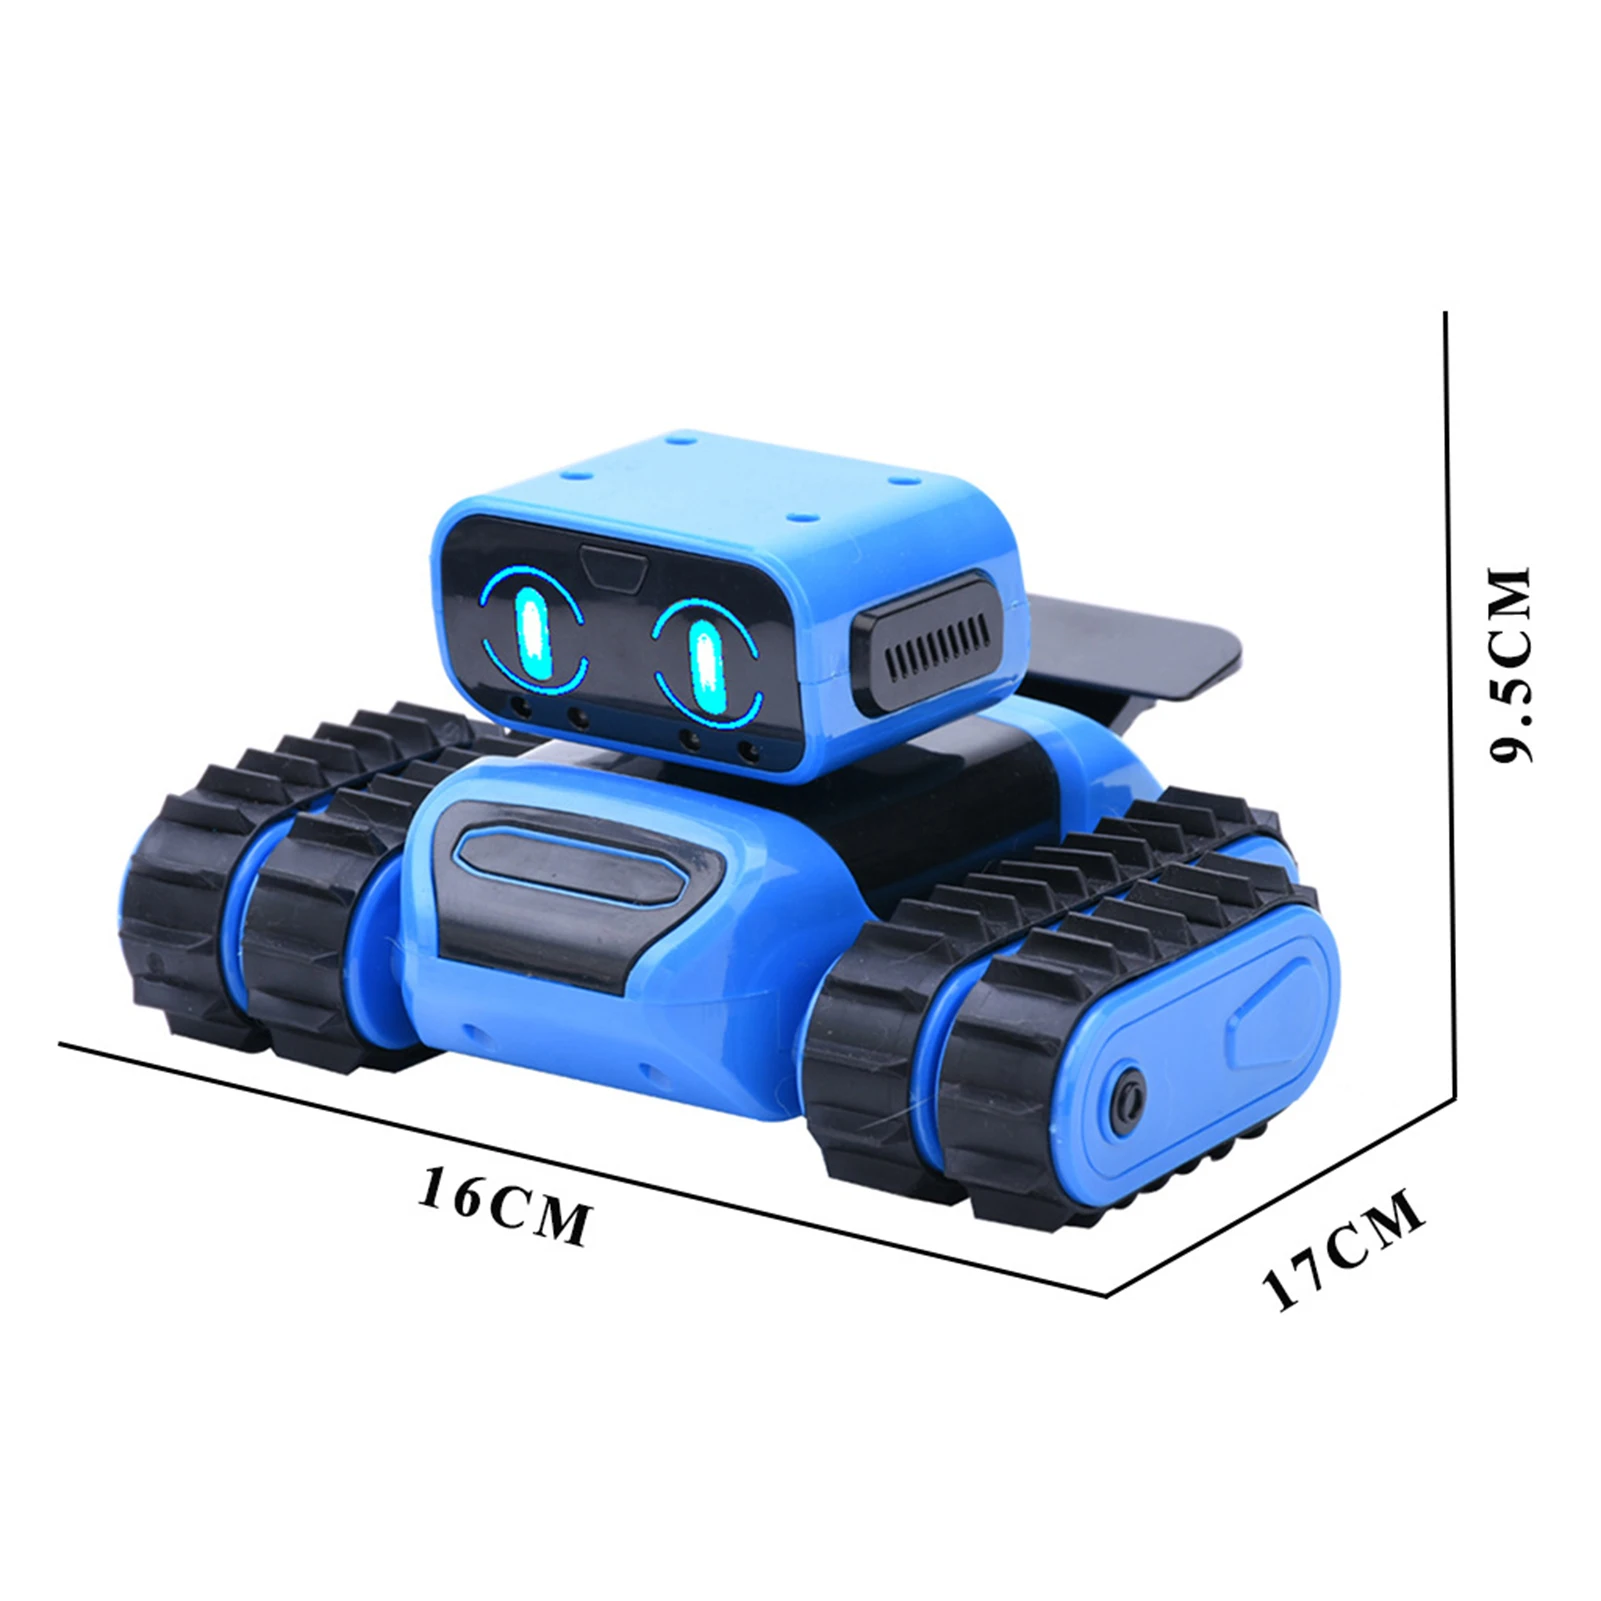 

DIY Assemble Electric Robot Gesture Induction Obstacle Avoidance Educational Toy Intelligence Development Parent-child Game